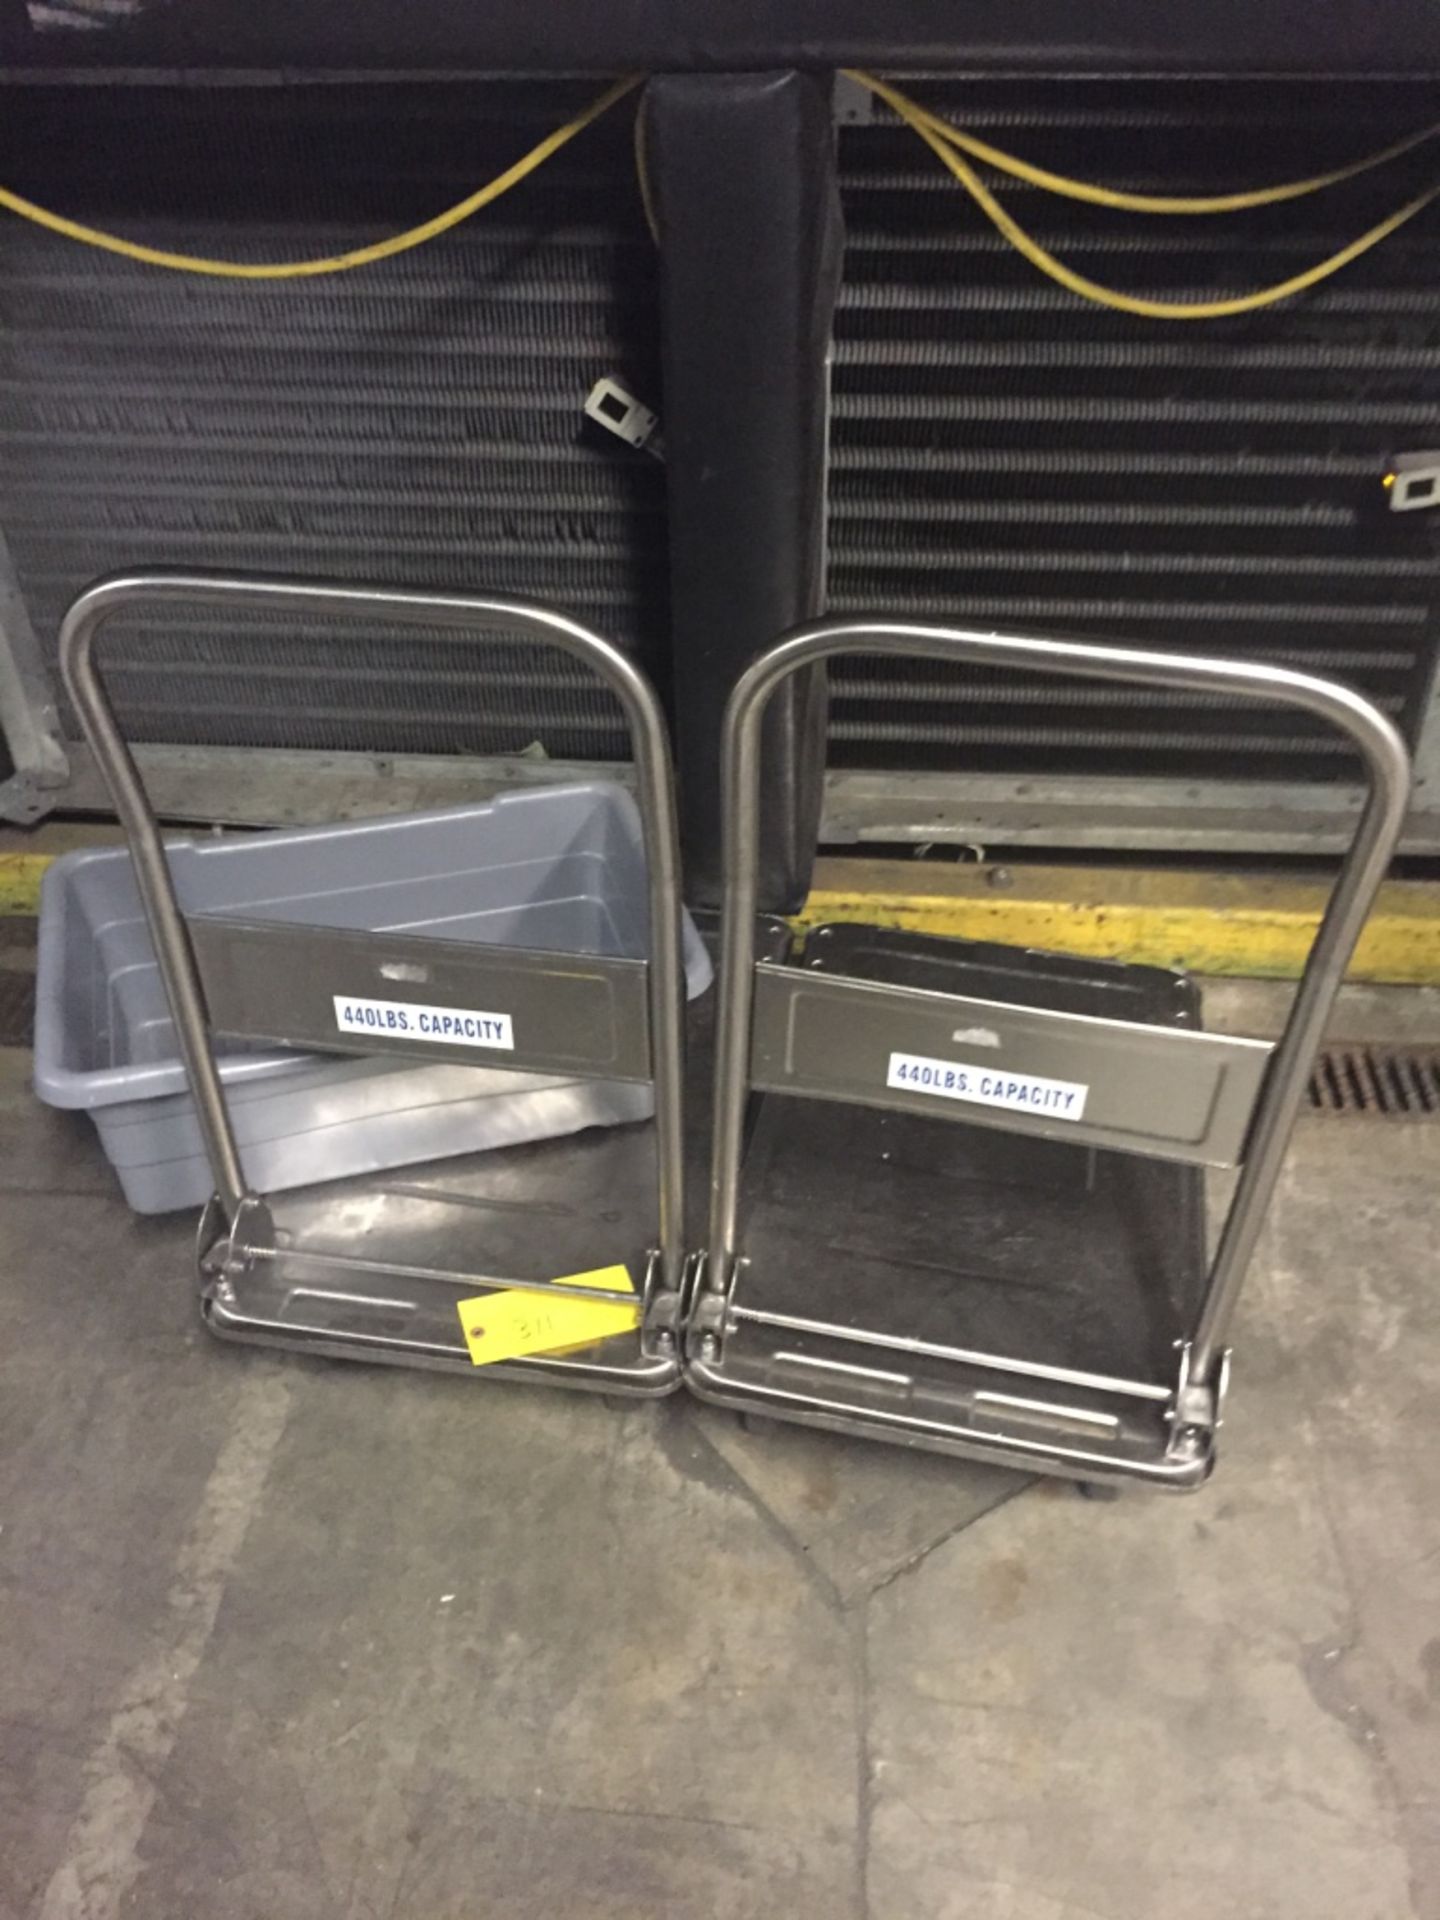 Lot of 2 Carts, Rigging Fee $75, If Crating or Lumber is Needed Add $50